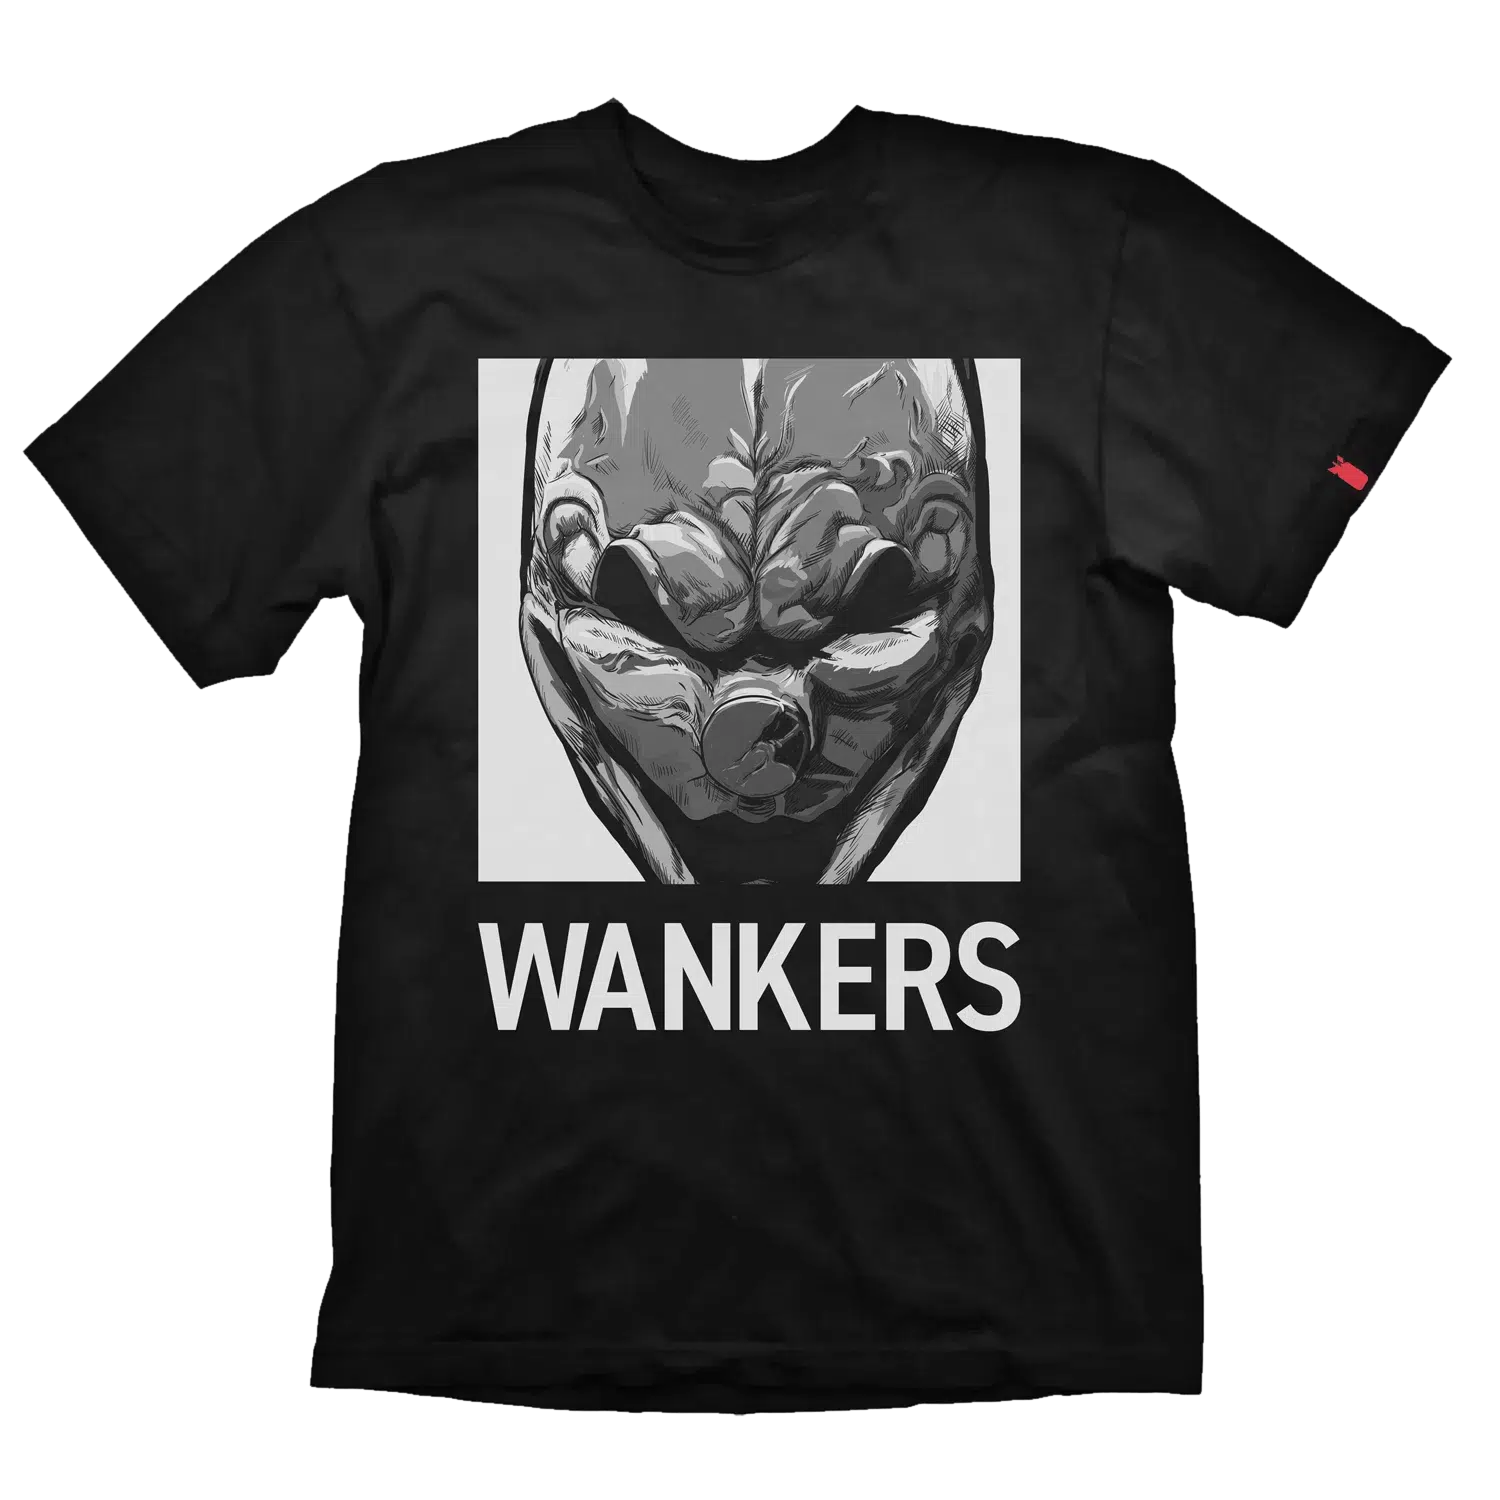 Payday 2 T-Shirt "Wankers" Black S